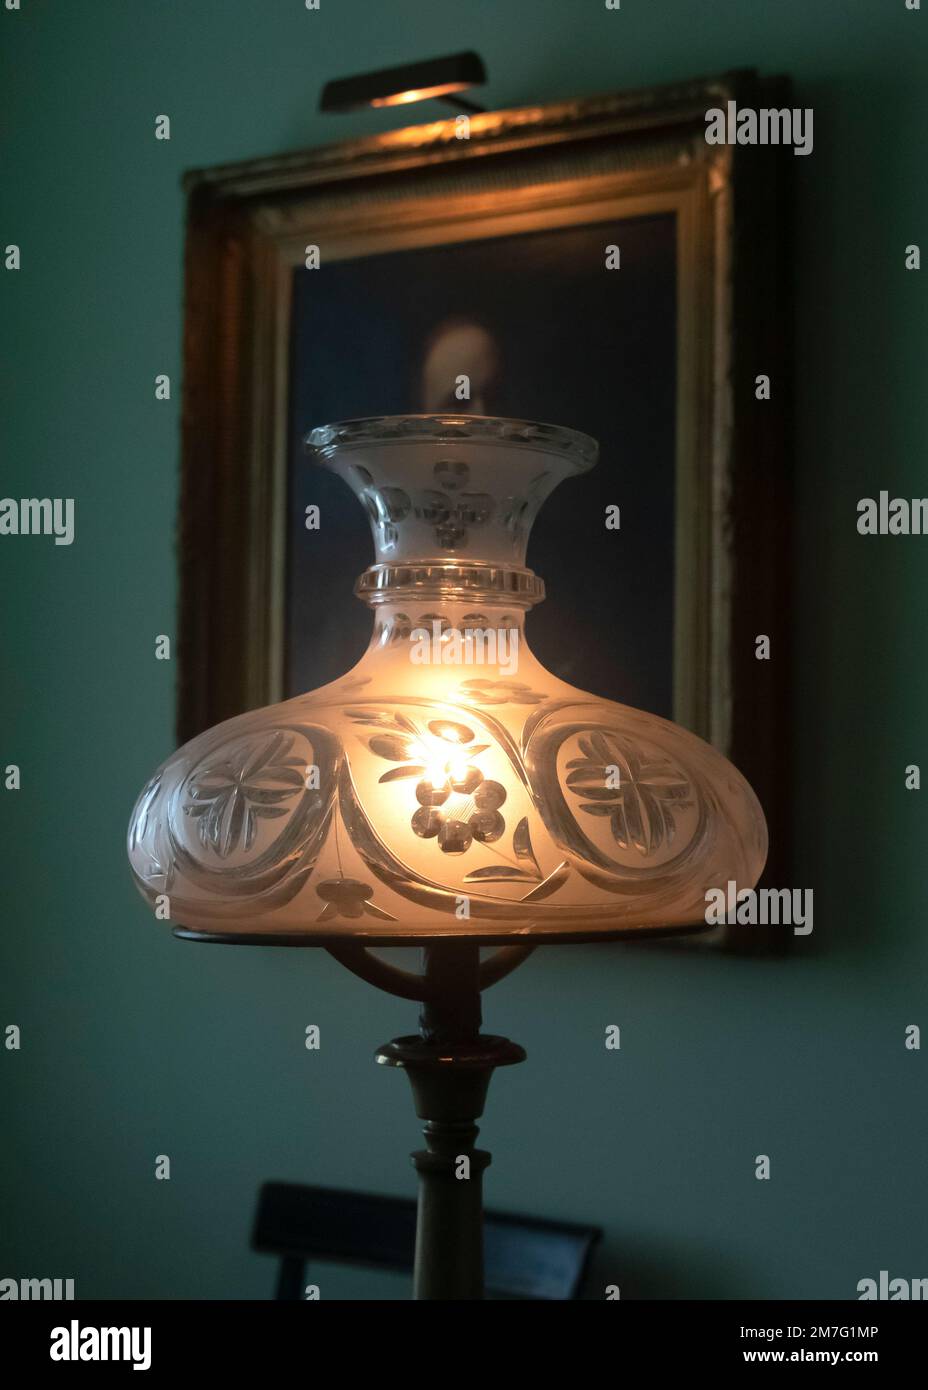 Lamp for lighting and portrait. Hagley Museum, Wilmington, Delaware, USA Stock Photo